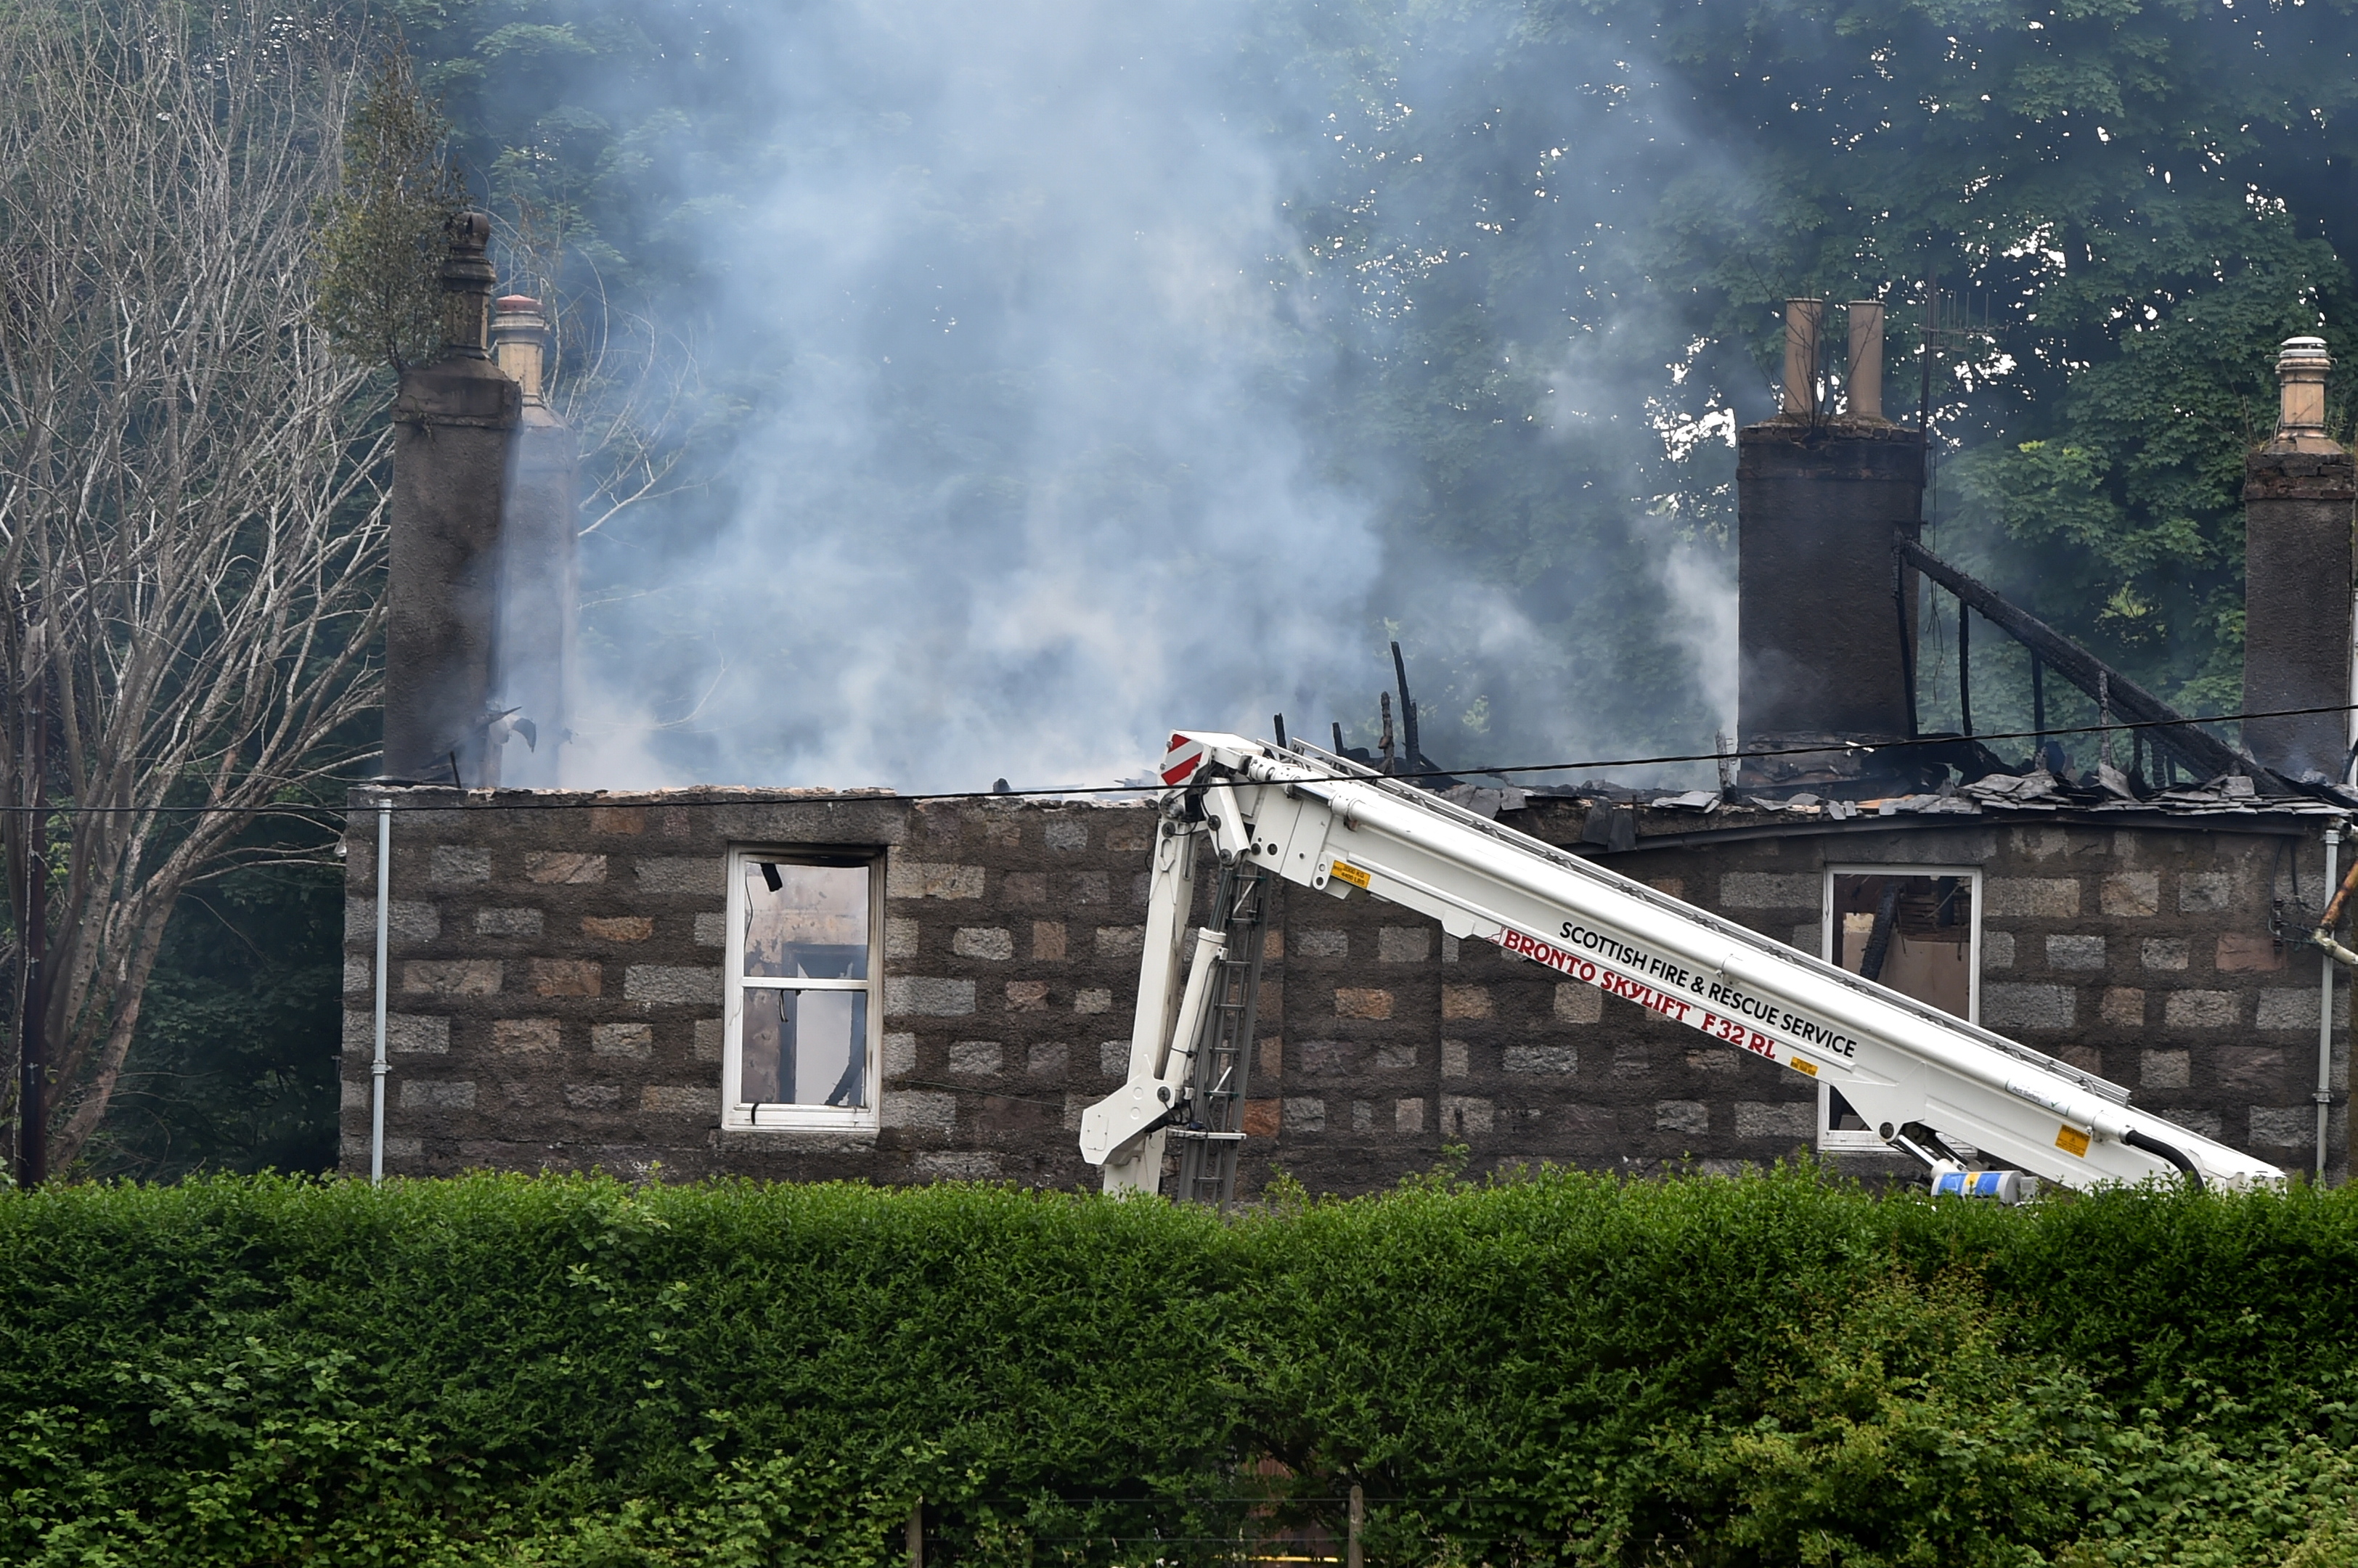 The fire service attended the blaze at Grandholm Bowling Club in Bridge of Don